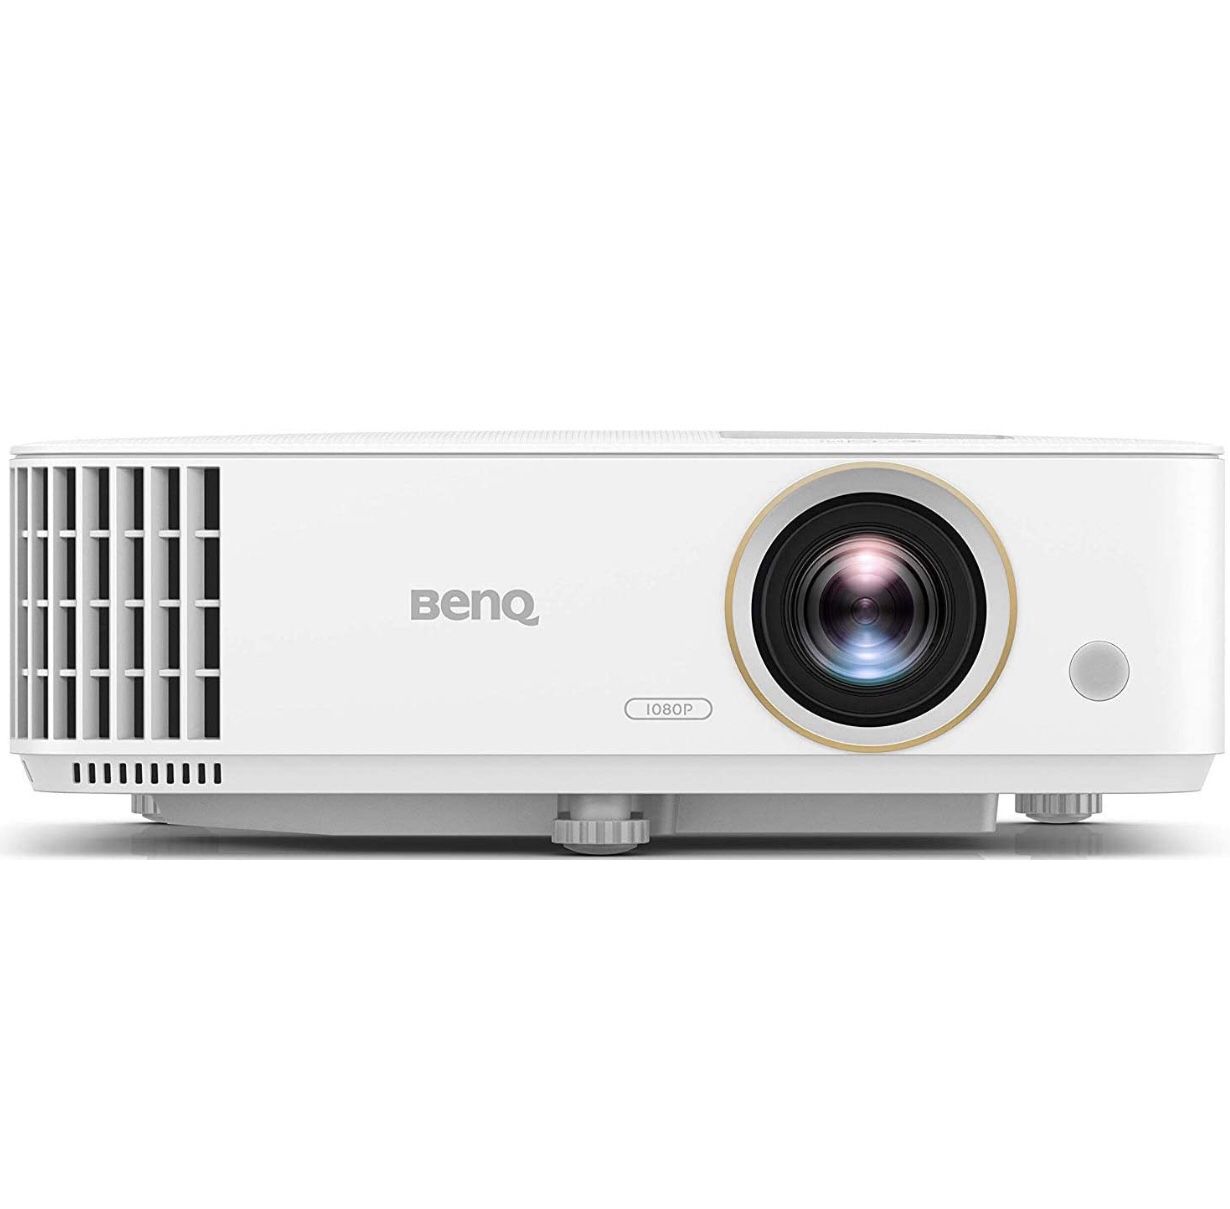 BenQ TH585 1080p Home Entertainment Projector | 3500 Lumens | High Contrast Ratio | Loud 10W Speaker | Low Input Lag for Gaming | Stream Netflix & Pr